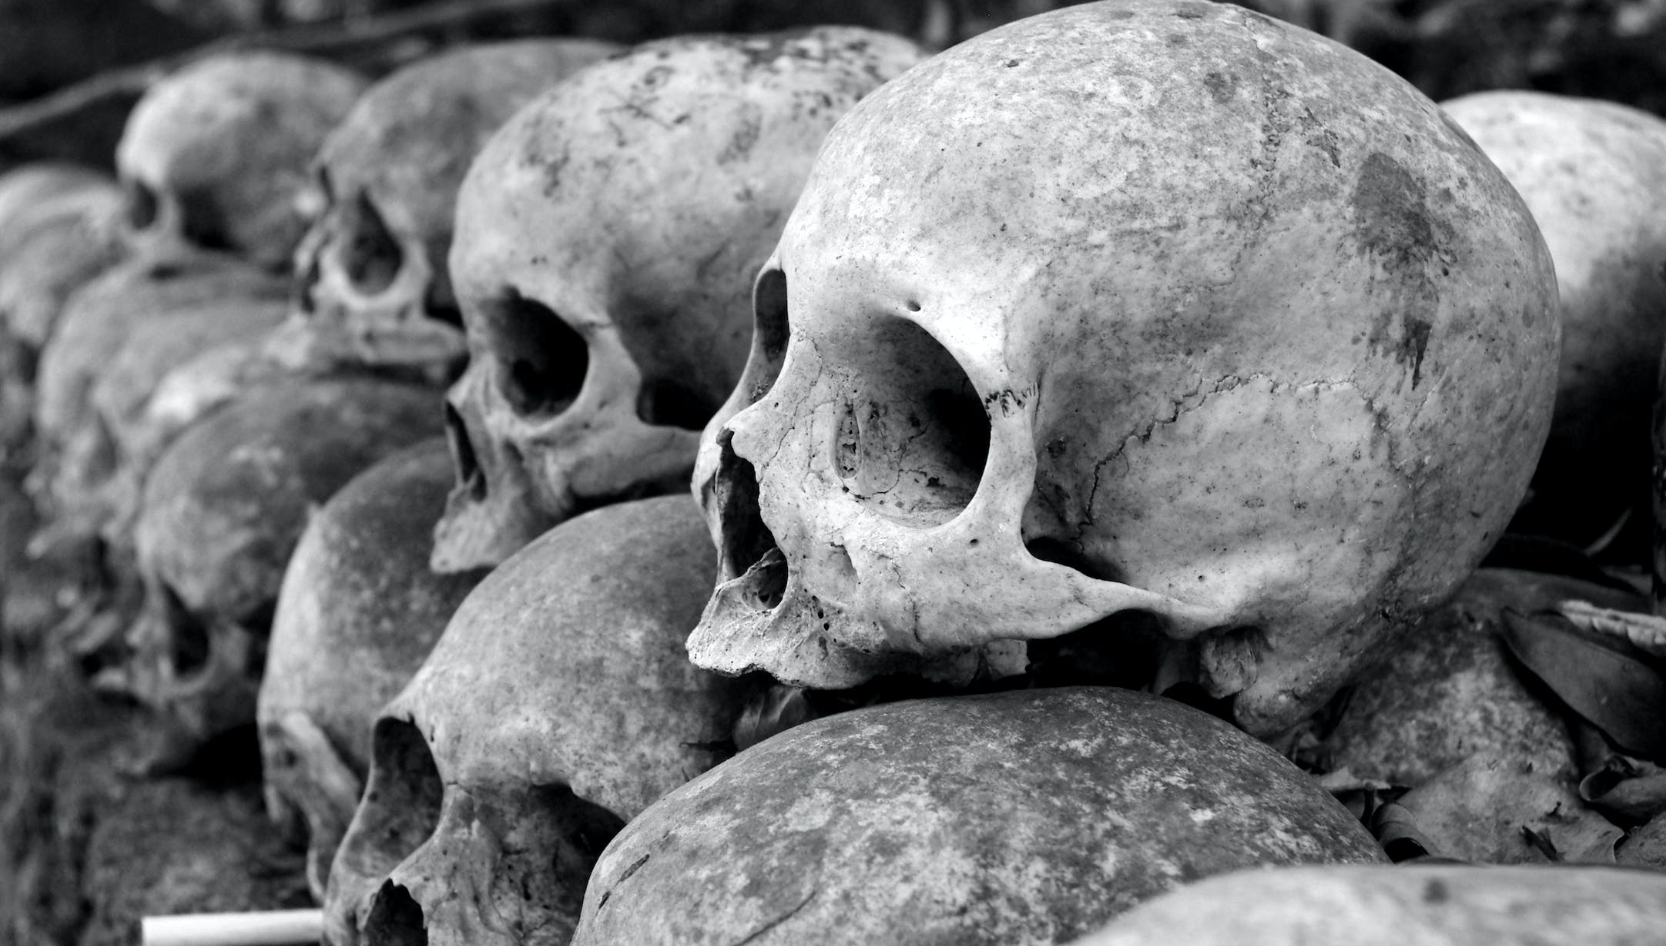 A row of skulls representing the death of Solana and its impending lack of future.